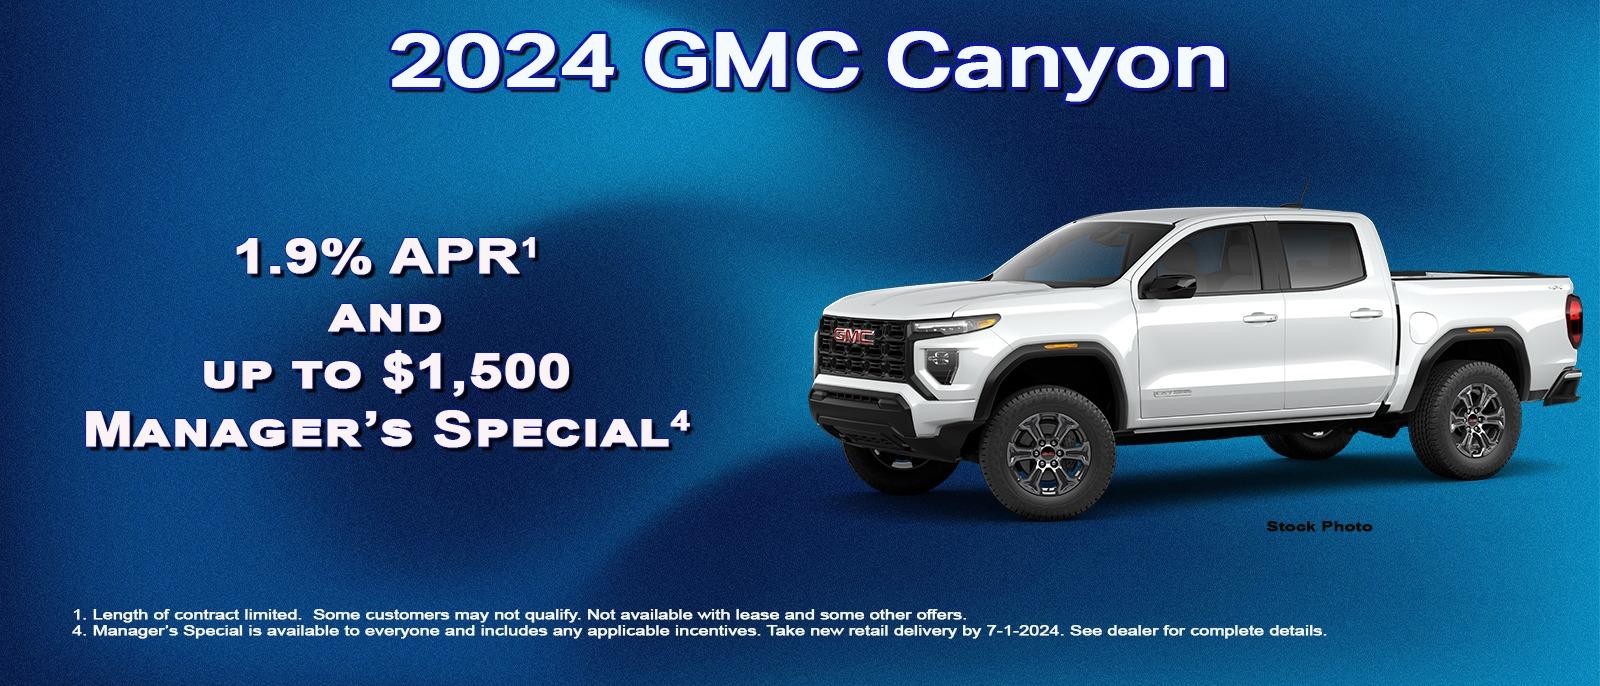 Get your new GMC Canyon now